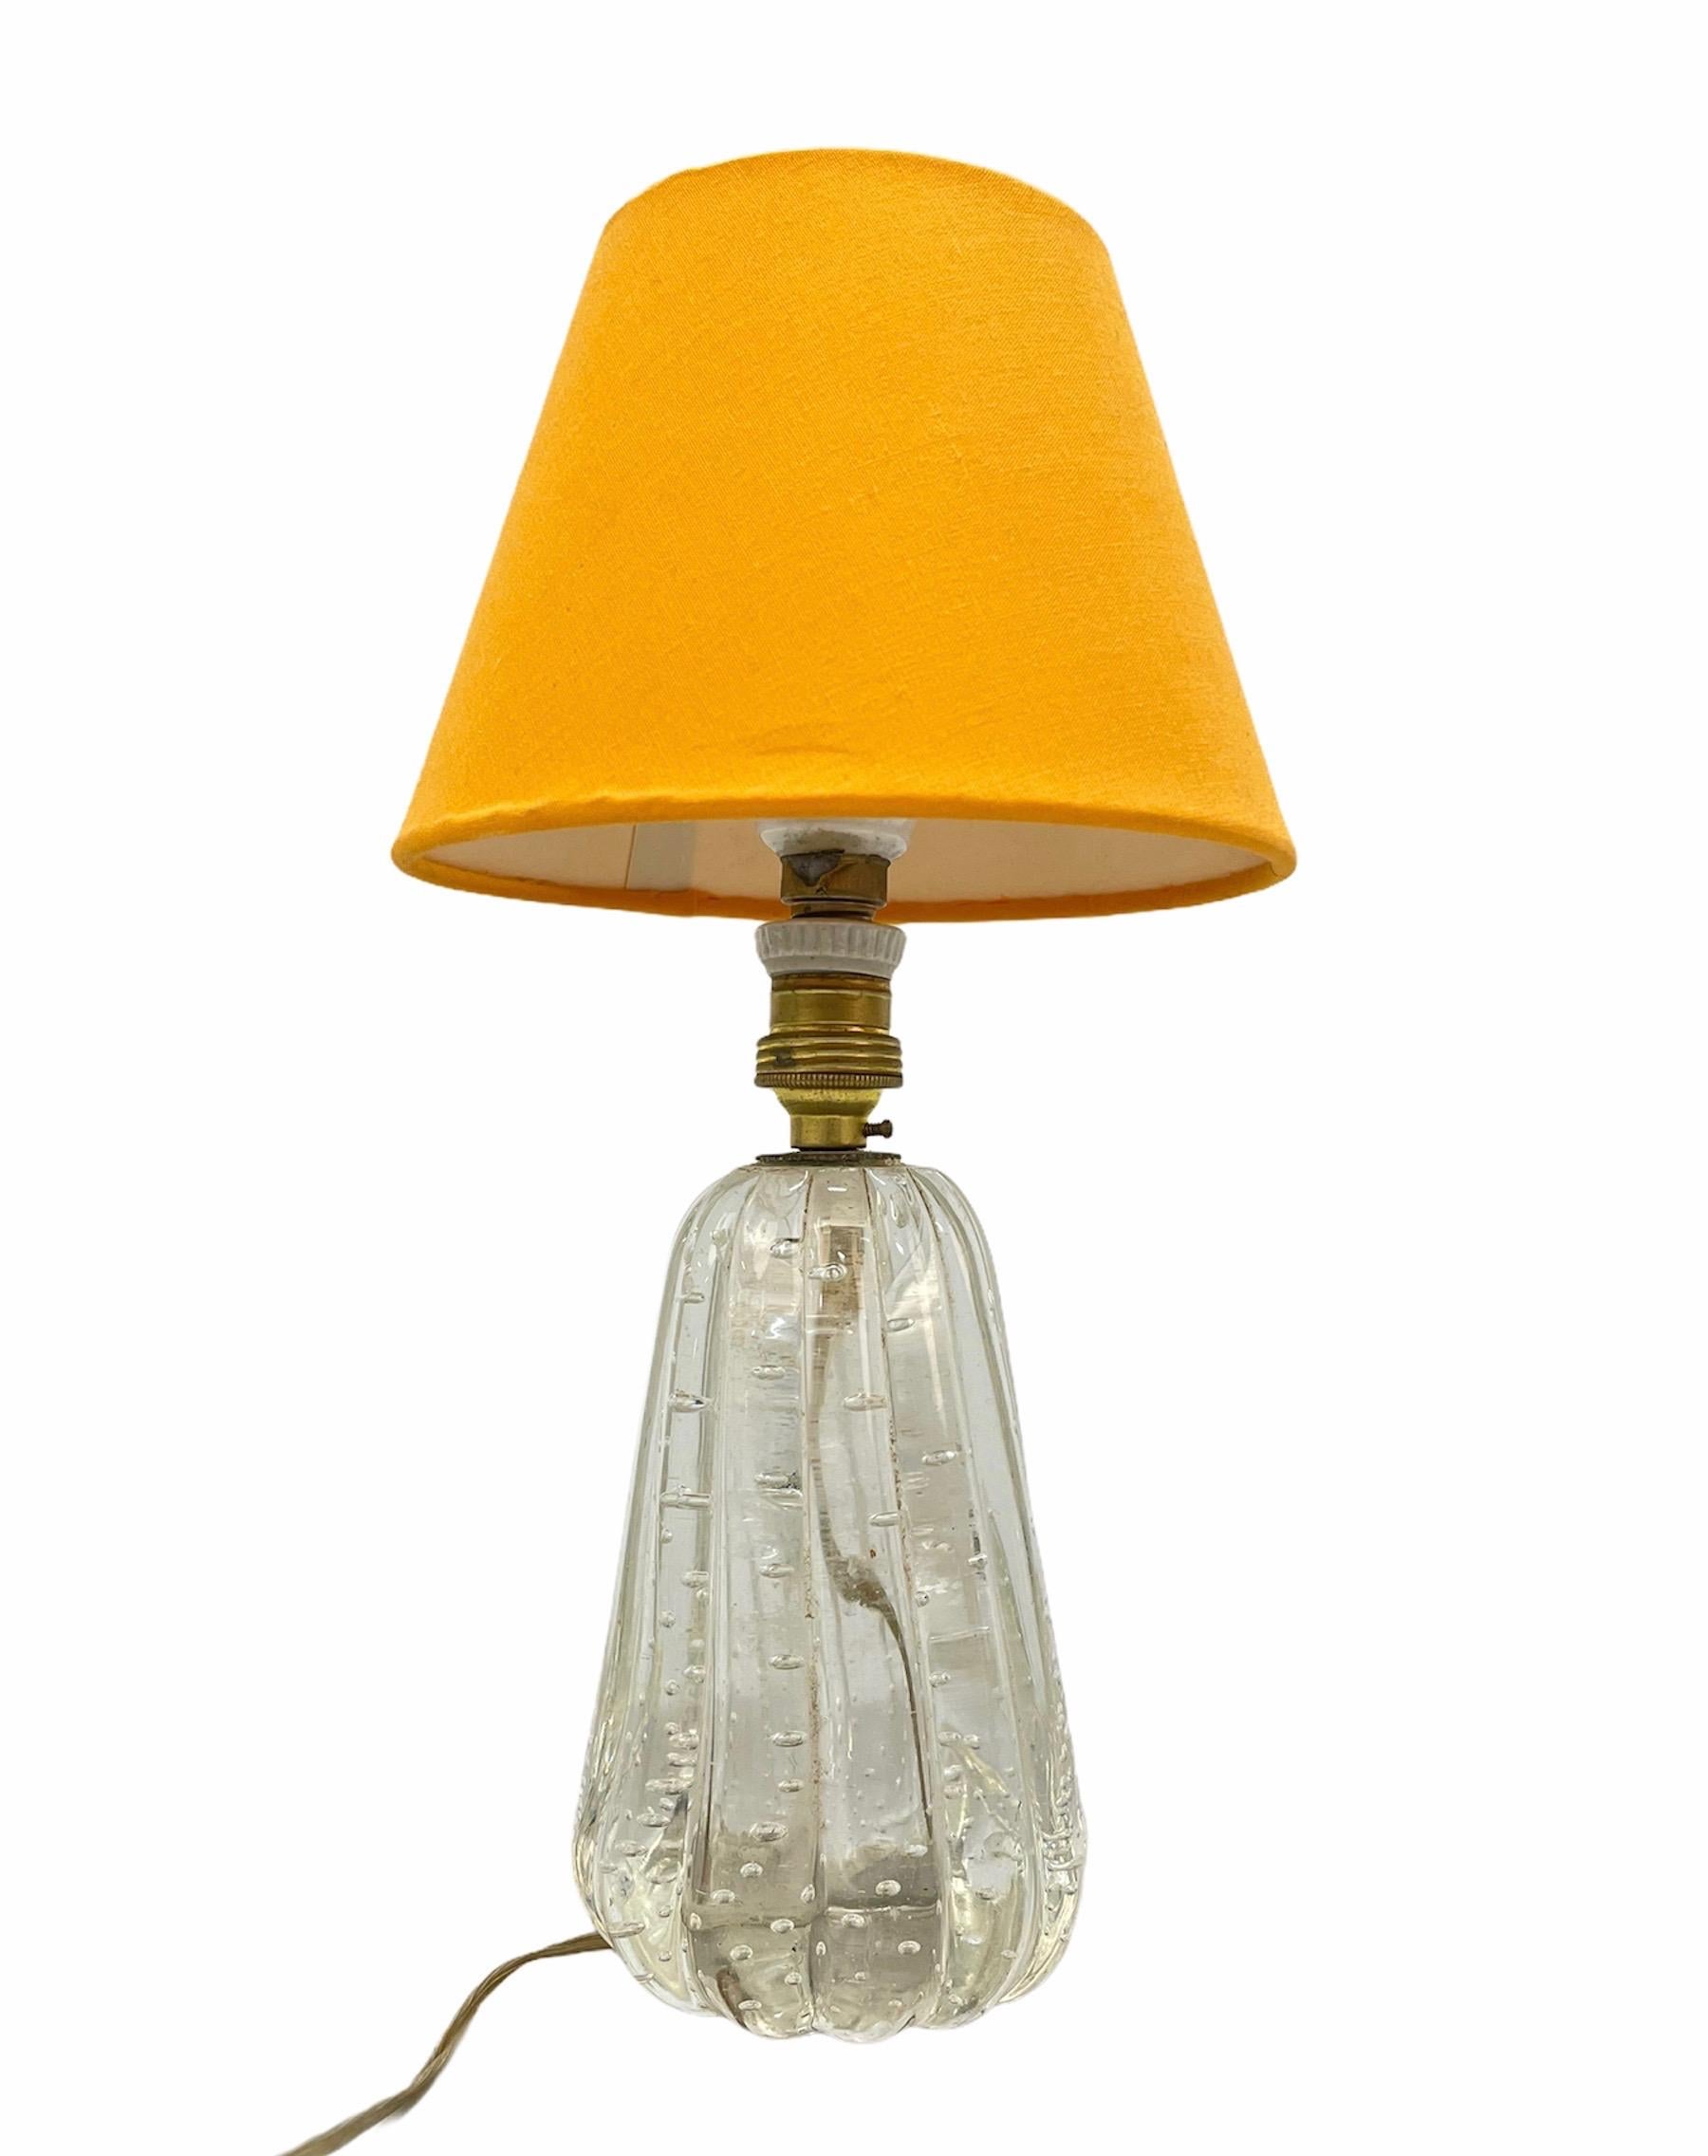 Magnificent midcentury Murano crystal glass table lamp. This extraordinary piece was designed by a Murano glass master artist, Archimede Seguso, in Italy during the 1950s. 

This fantastic lamp is in fantastic vintage conditions with no chips or